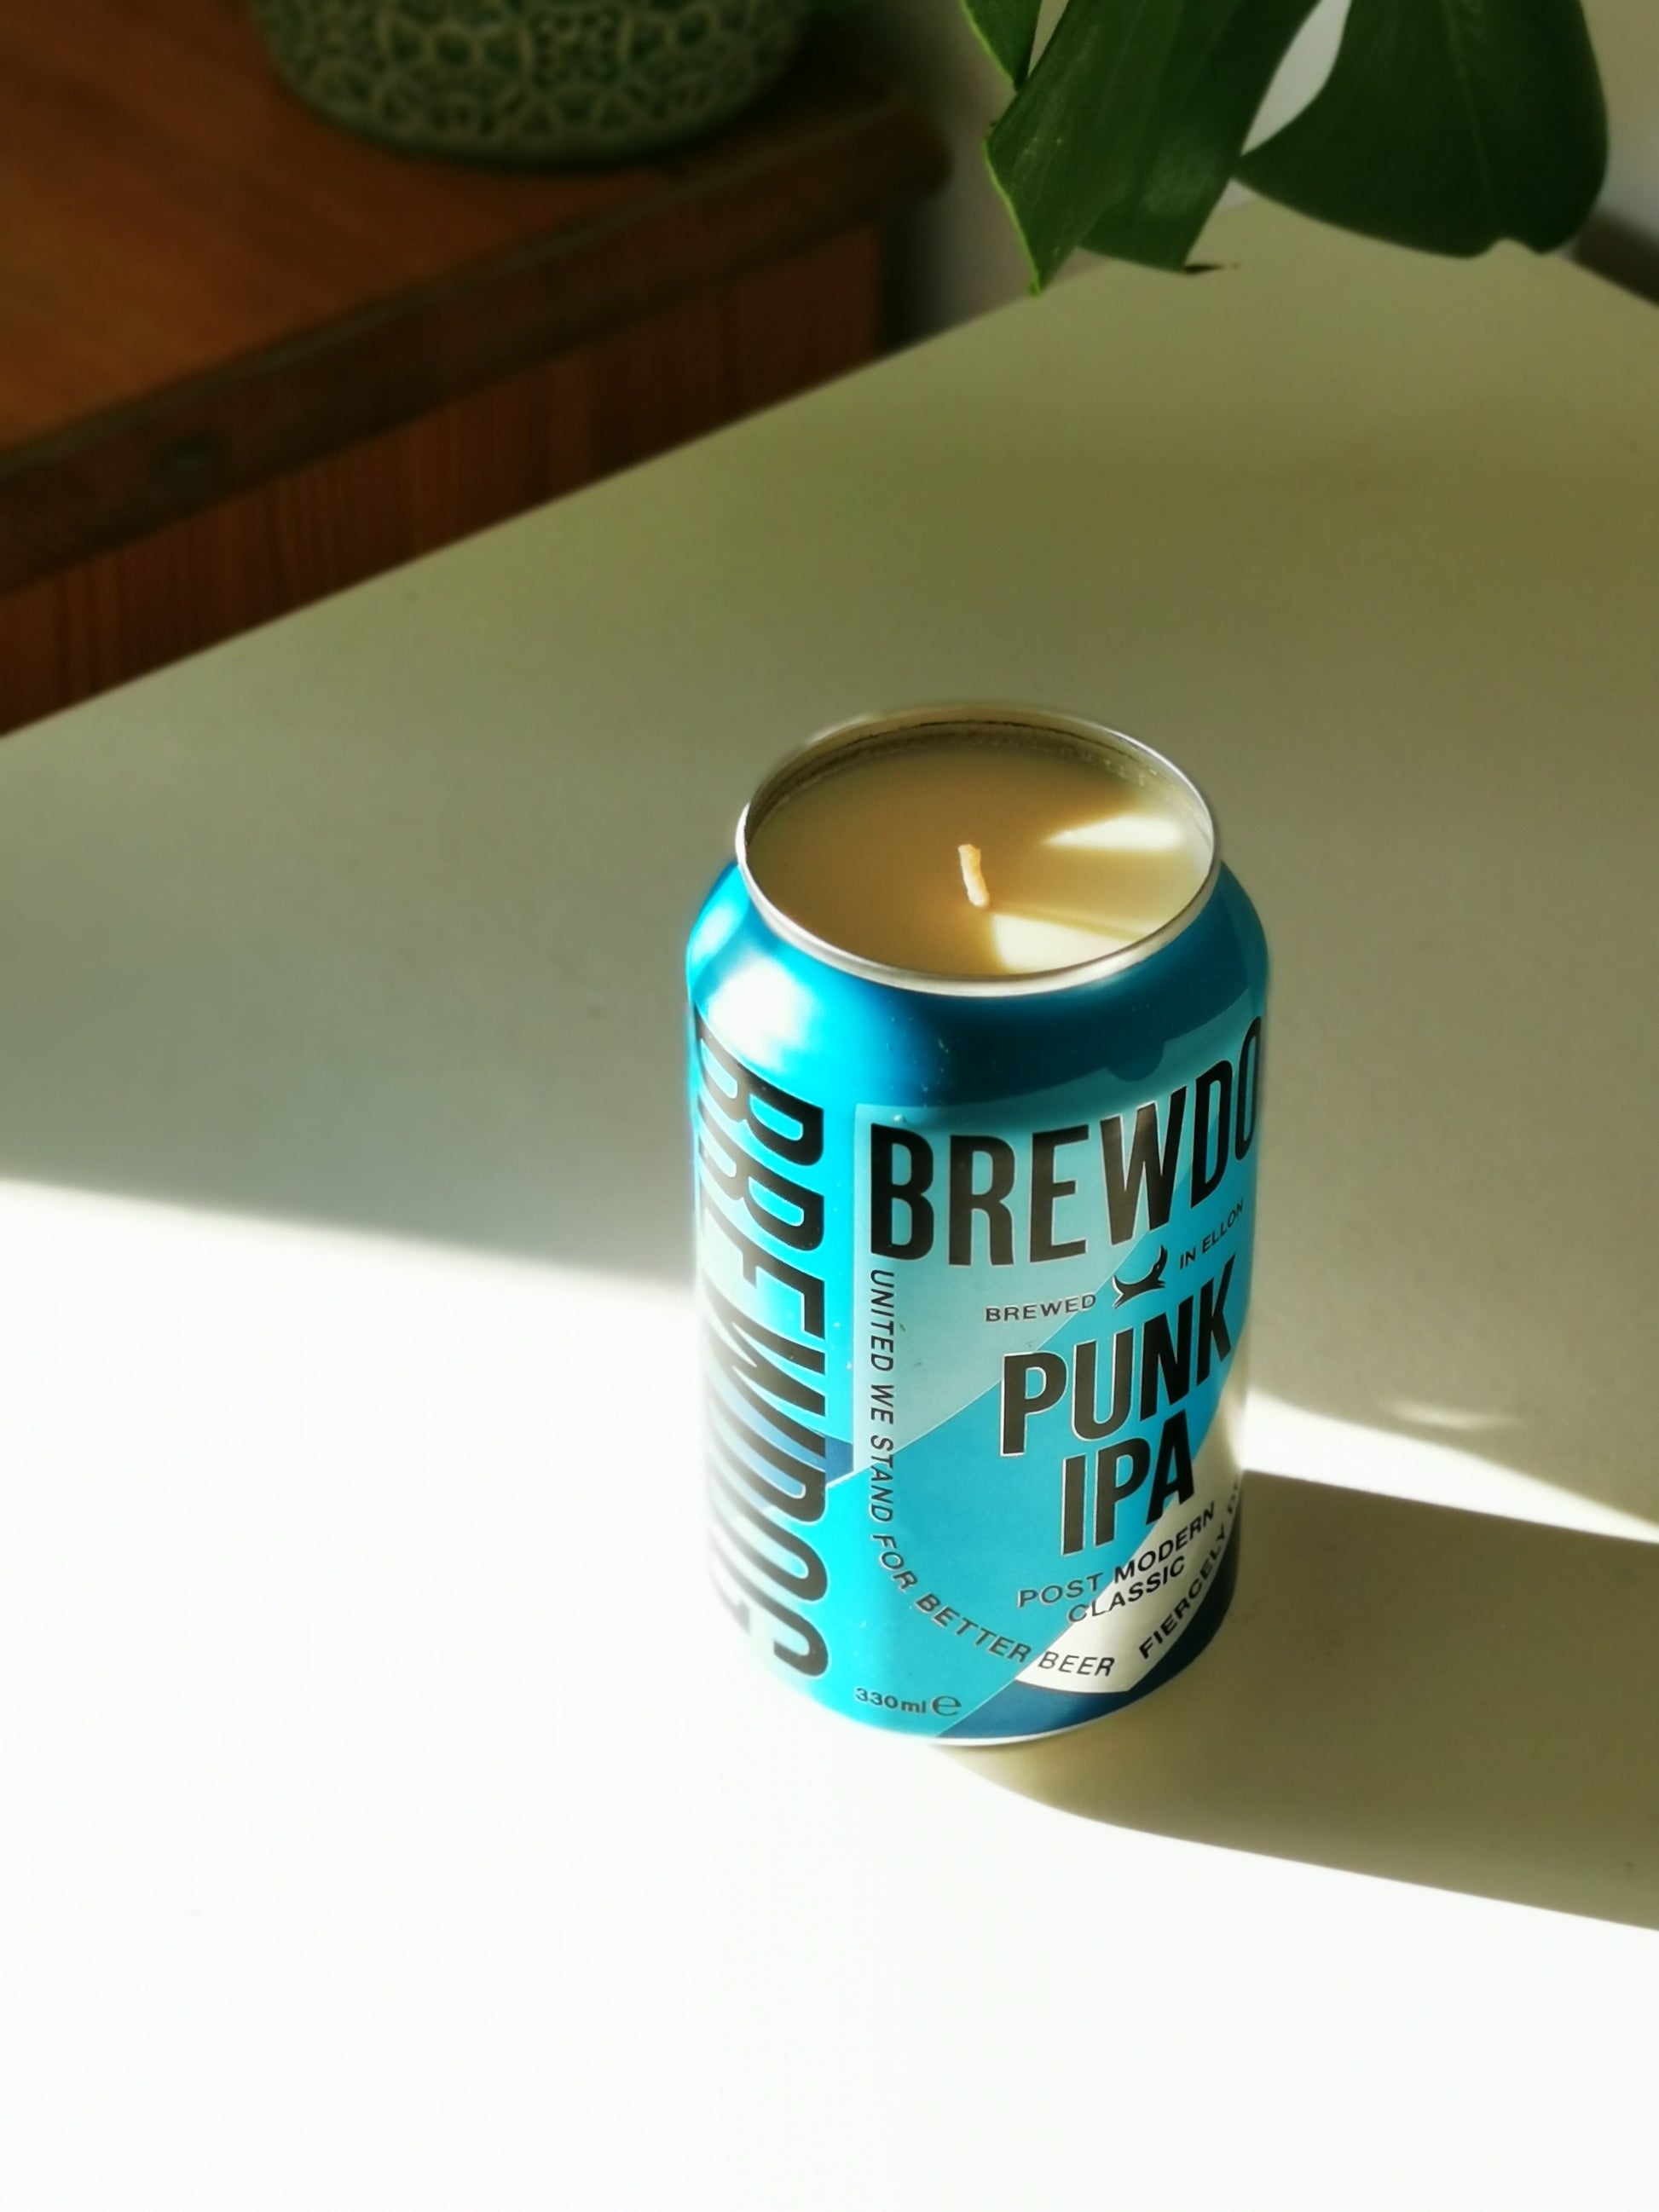 BrewDog Punk IPA Craft Beer Can Candle Beer Can Candles Adhock Homeware